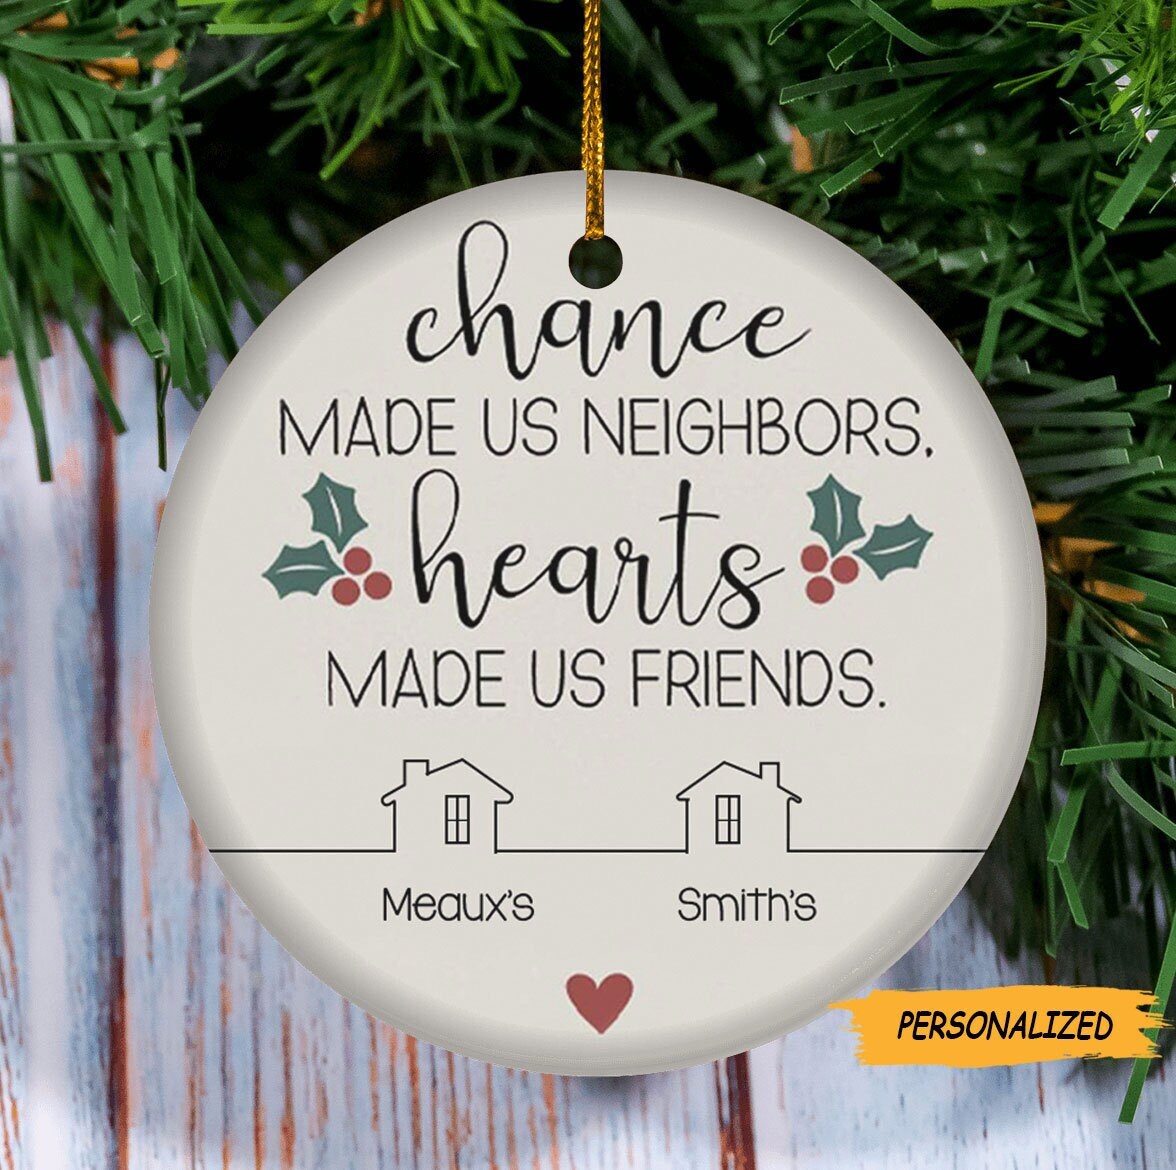 2022 Christmas Ornament, Christmas Hanging Ornaments, Hanging Accessories  Outdoor Indoor Decor, Christmas Tree Decorations, Gift for Families Friends  Neighbors,G-5 